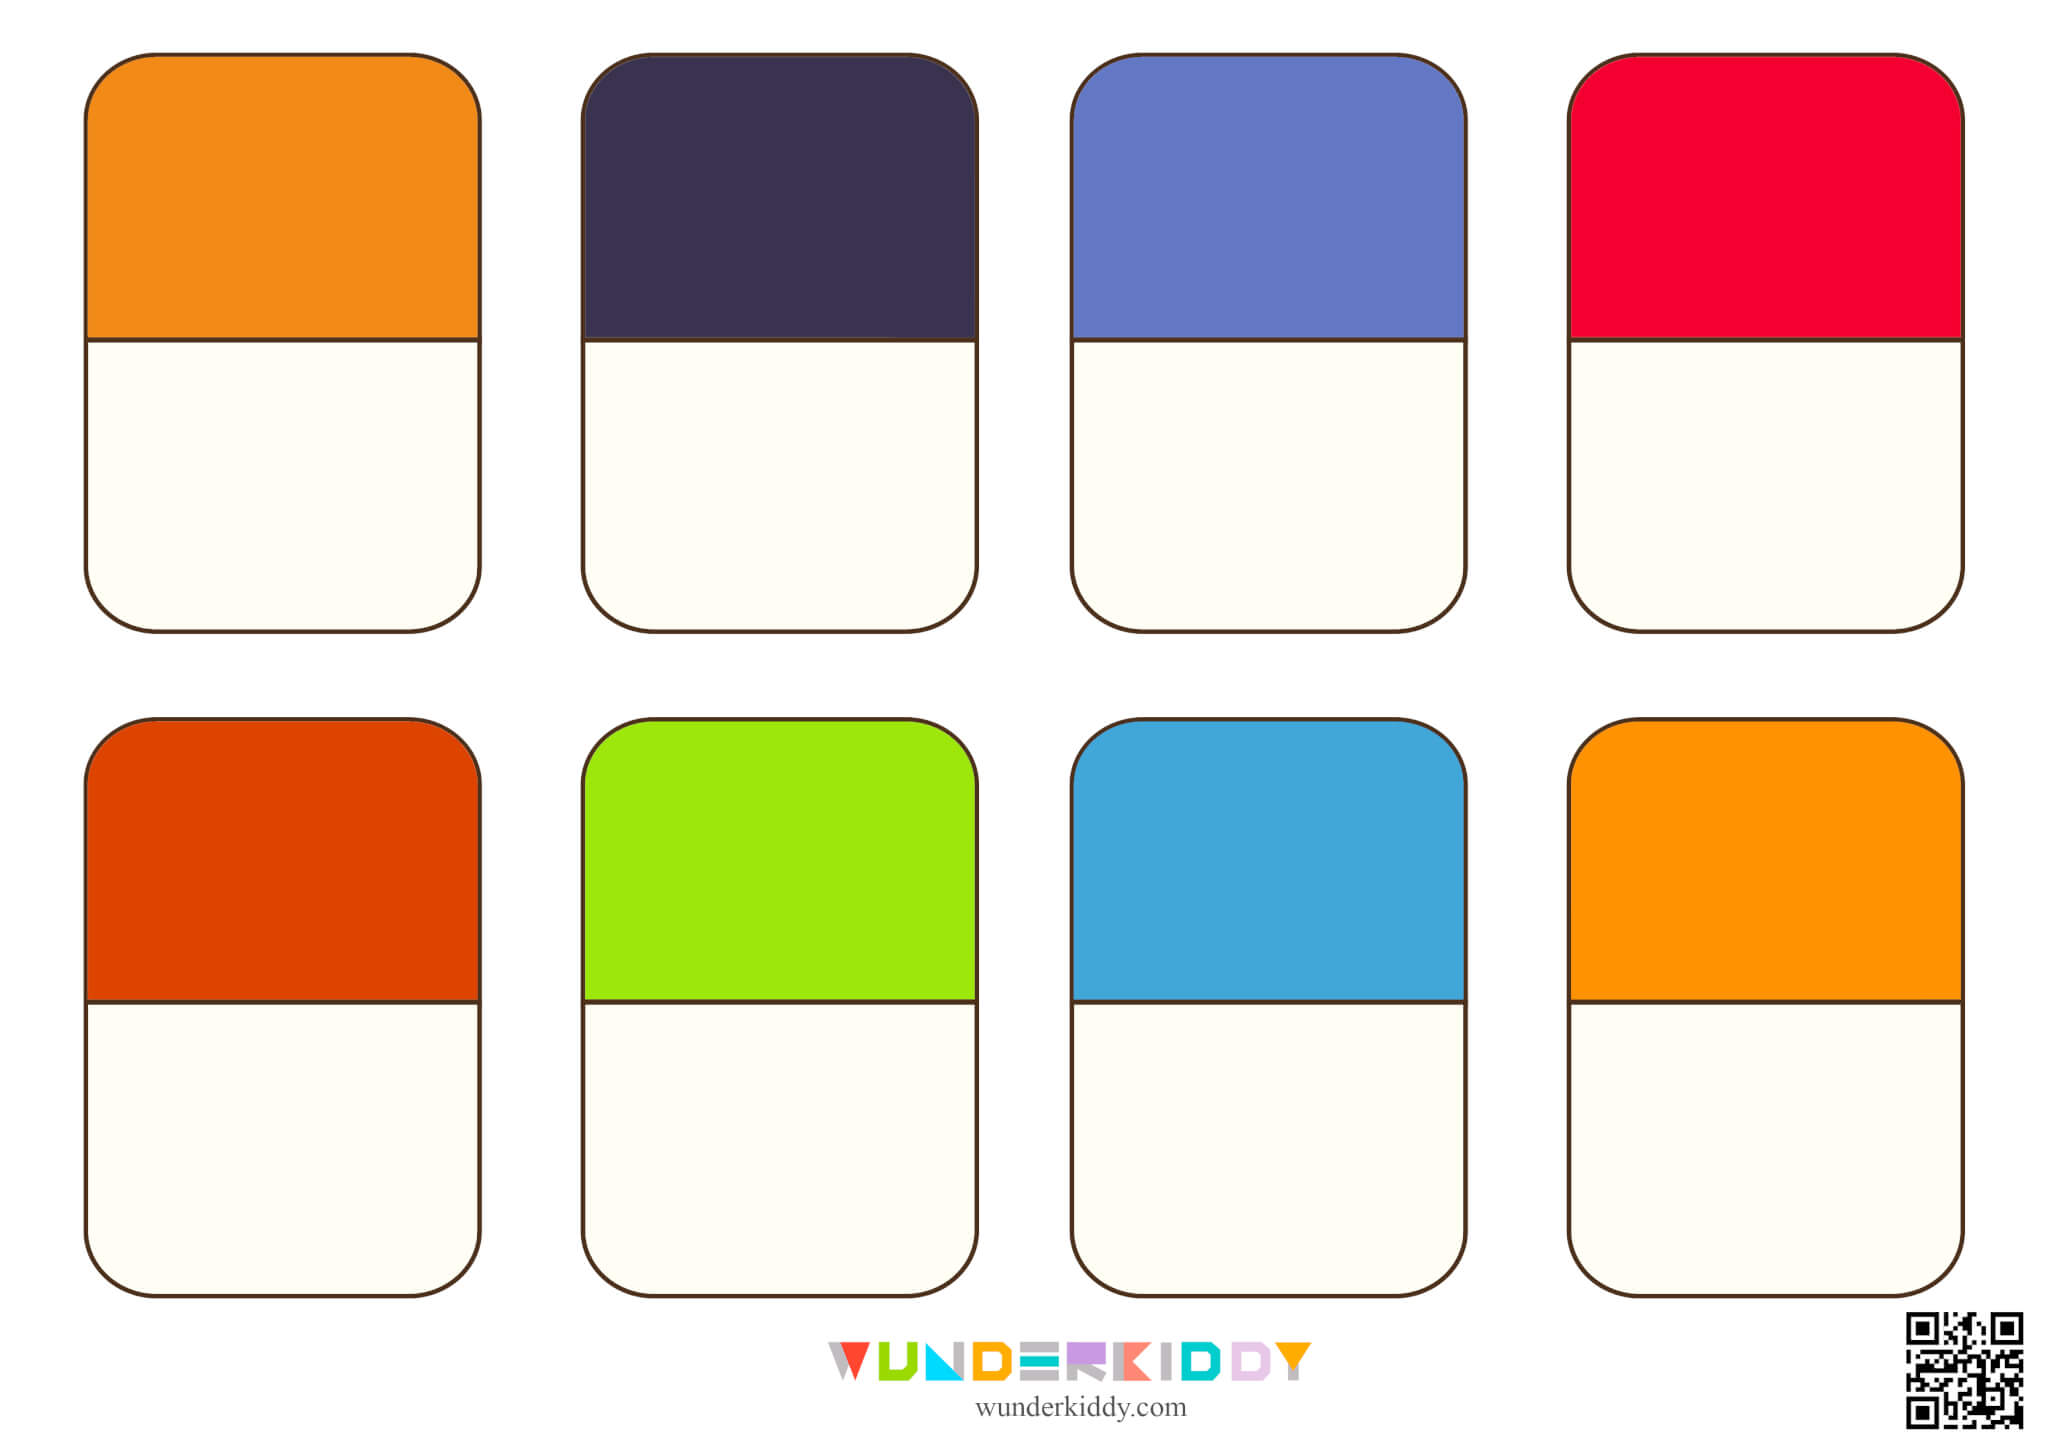 Learning Colors Activity for Kindergarten - Image 3